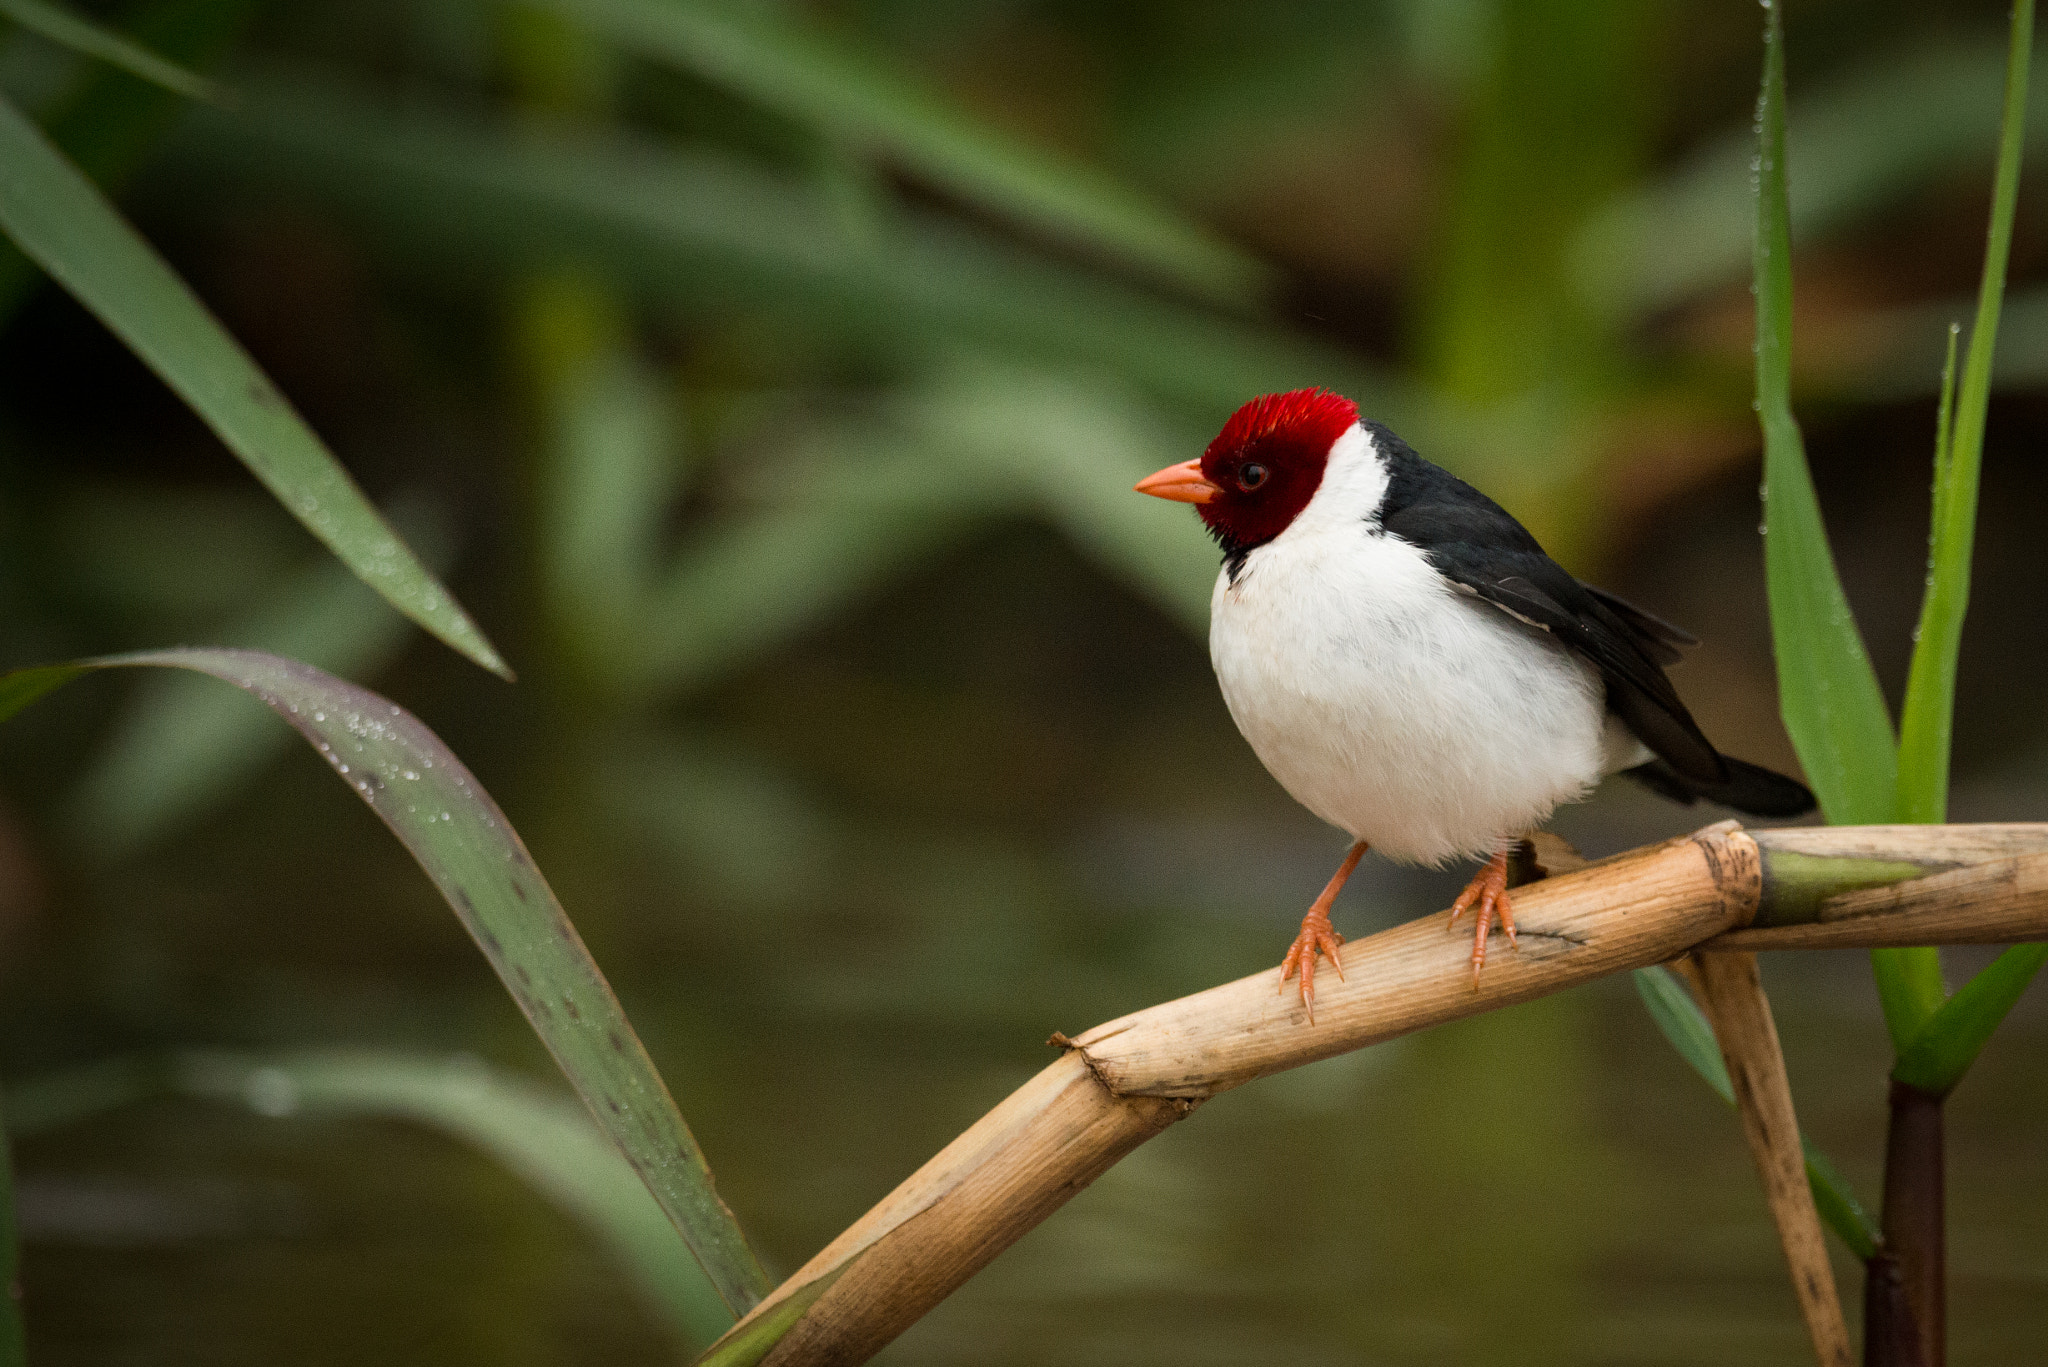 Nikon AF-S Nikkor 800mm F5.6E FL ED VR sample photo. Yellow-billed cardinal perched on branch among reeds photography